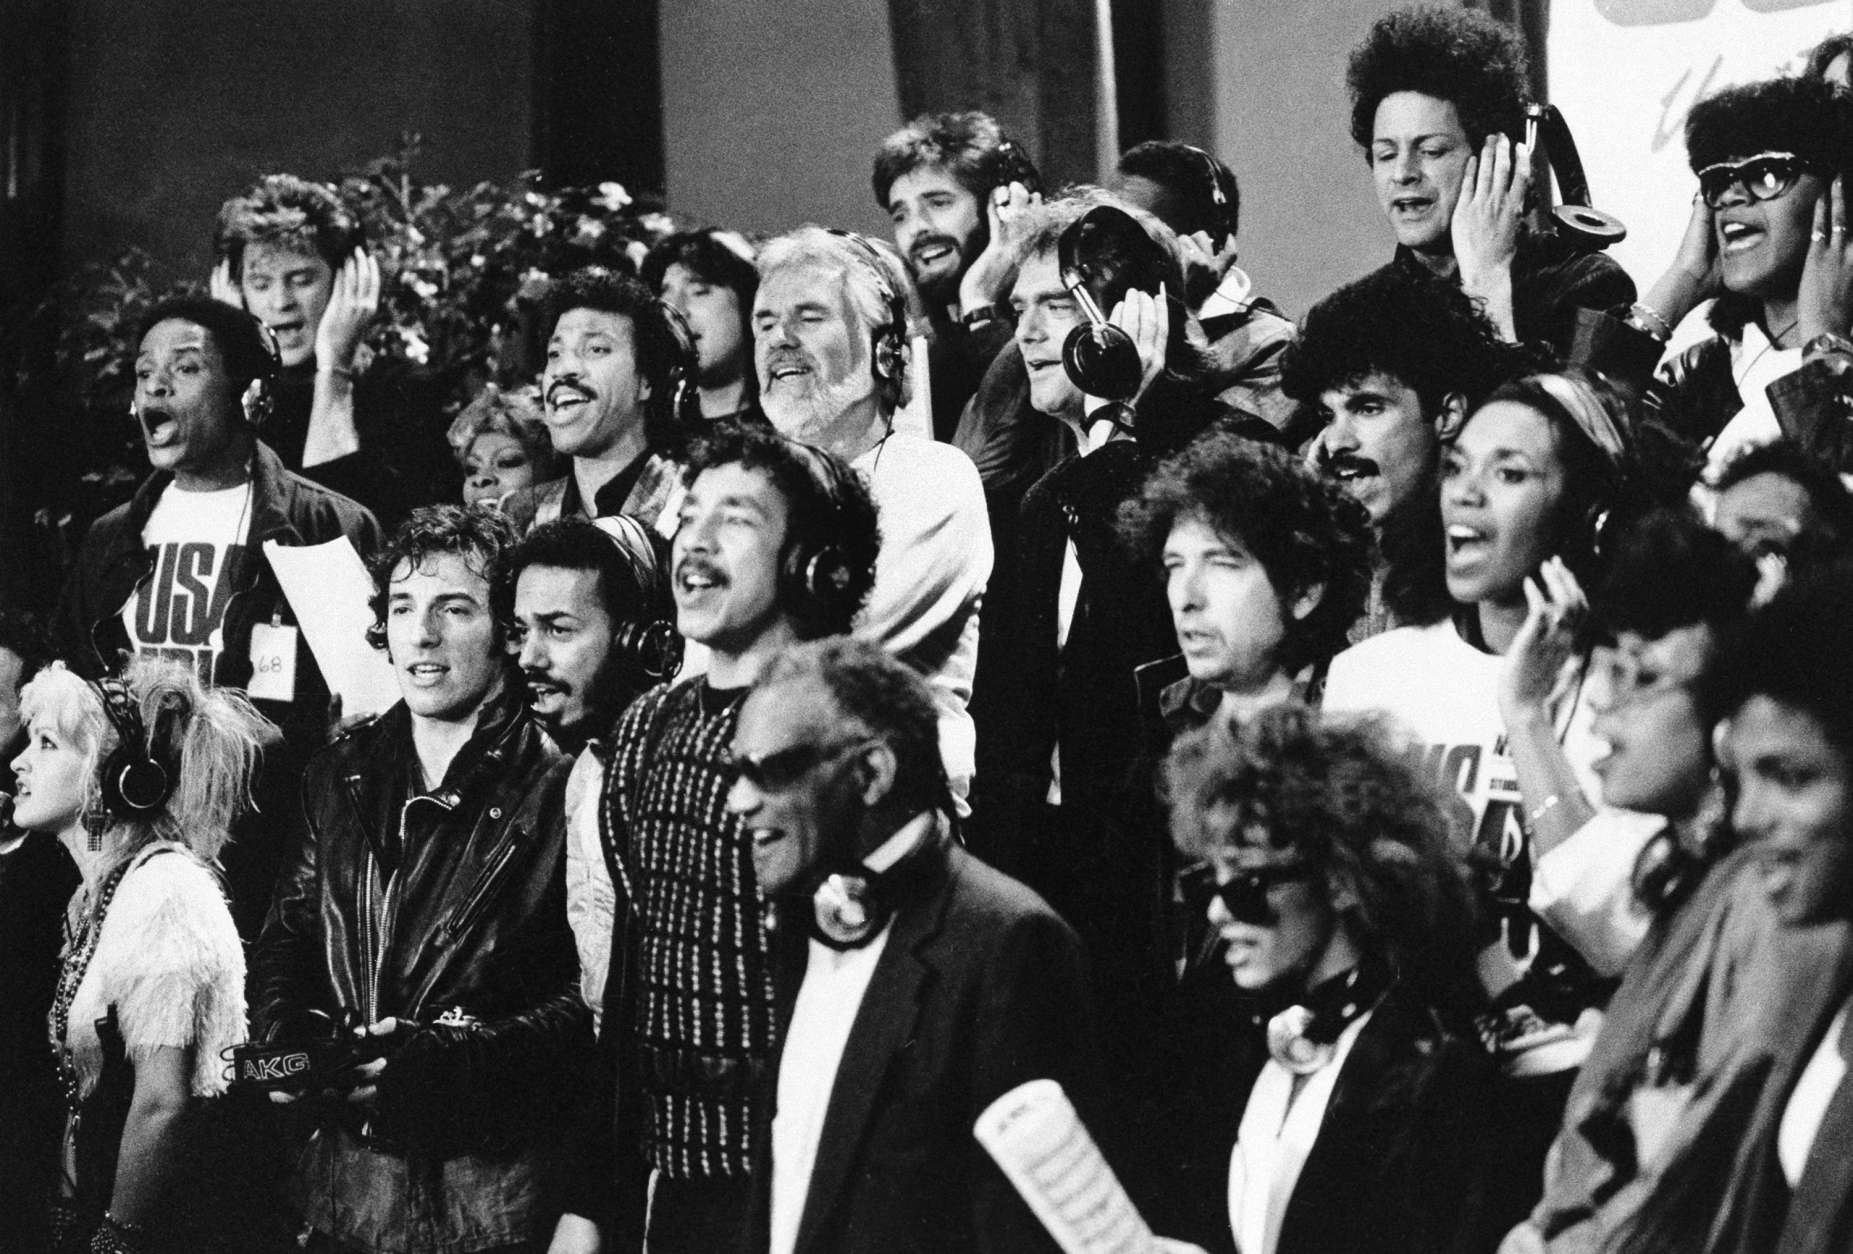 Some of a group of 45 music artists calling themselves "USA For Africa" recording "We Are The World" in Los Angeles, Calif.  Jan. 30, 1985. Bottom row, from left; Cyndi Lauper, Bruce Springsteen, James Ingram, Smokey Robinson, Ray Charles, Sheila E., June Pointer, Randy Jackson. Middle row, from left; Al Jarreau, Dionne Warwick, Lionel Richie, Kenny Rogers, Huey Lewis, Bob Dylan, John Oates, Ruth Pointer. Top row, from left; Daryl Hall, Steve Perry, Kenny Loggins, Jeffrey Osborne, Lindsay Buckingham, and Anita Pointer.  (AP Photo)